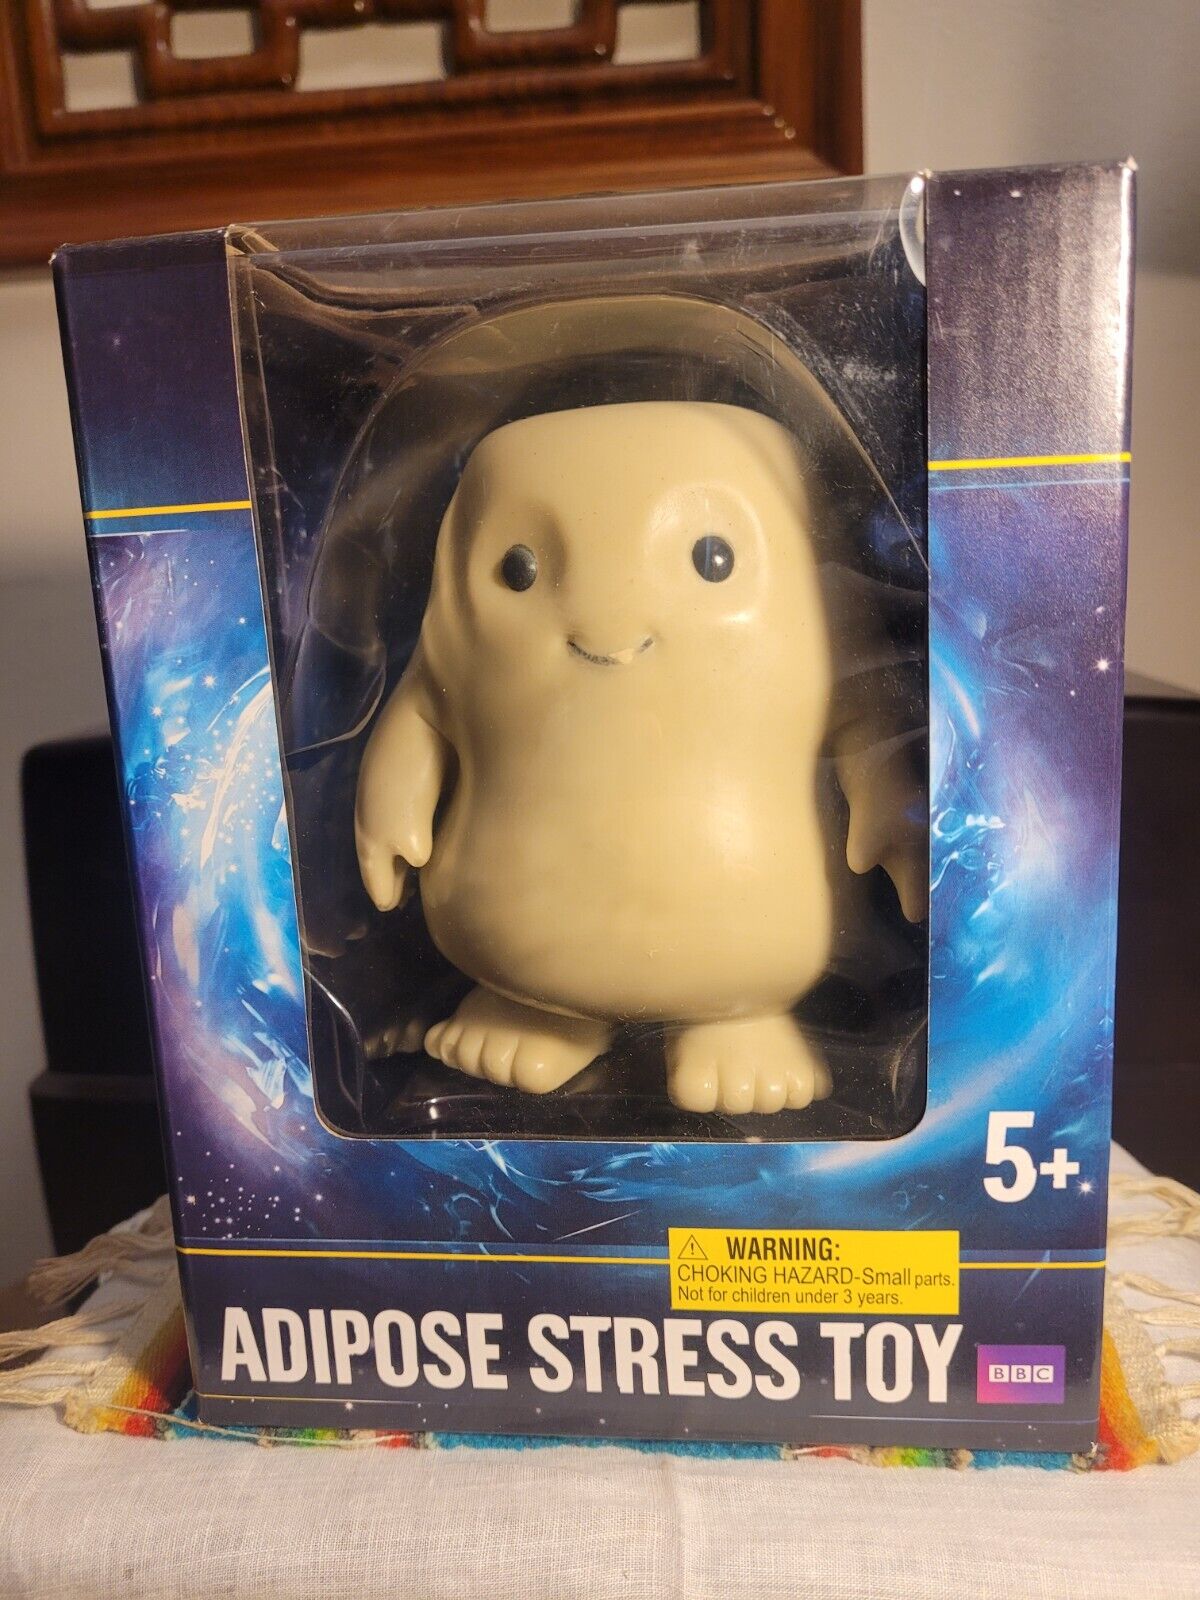  New Doctor Who BBC Adipose Character Stress Toy Open Box